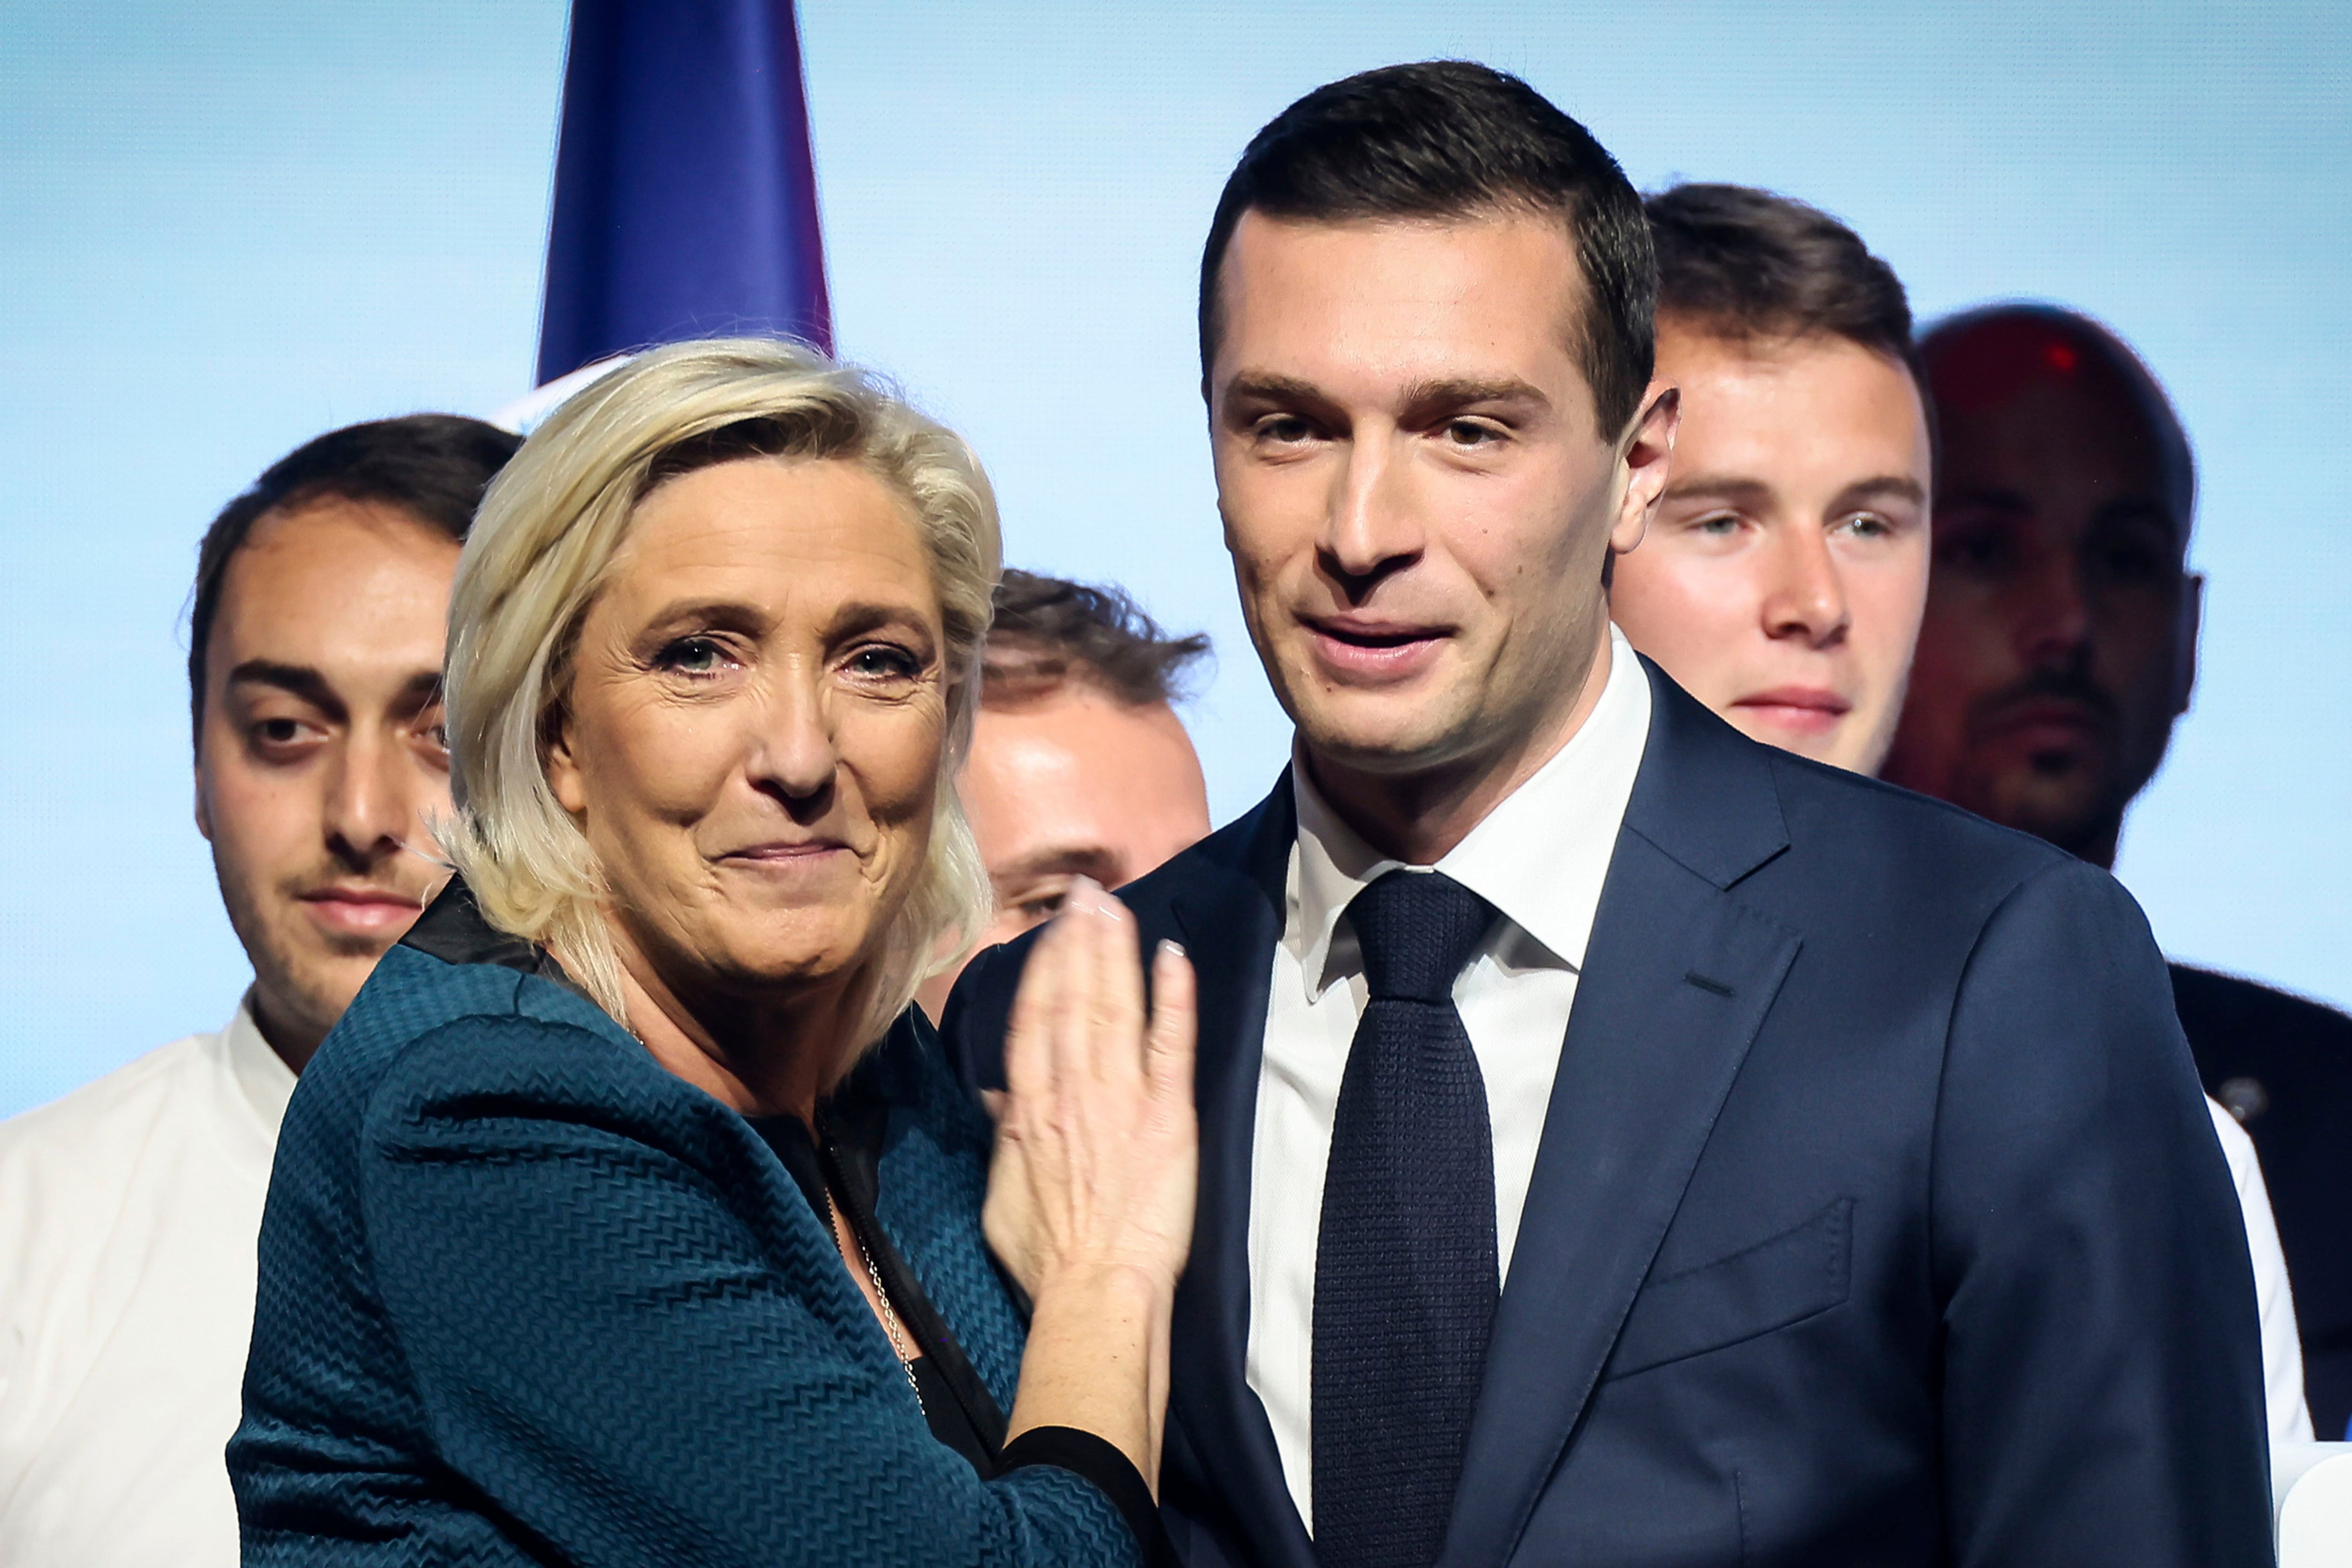 Leader of the French far-right National Rally Marine Le Pen, left, and lead candidate of the party for the upcoming European election Jordan Bardella during a political meeting on June 2, 2024 in Paris. At just 28 years old, Jordan Bardella has led the French far right to a landslide victory in the European Parliament election in June. After voters propelled Marine Le Pen's National Rally to a strong lead in the first round of national legislative elections on Sunday, Bardella has turned to rallying supporters to grant Marine Le Pen's party an absolute majority in the decisive round of voting on July 7 and make him the prime minister of France. (AP Photo/Thomas Padilla, File)